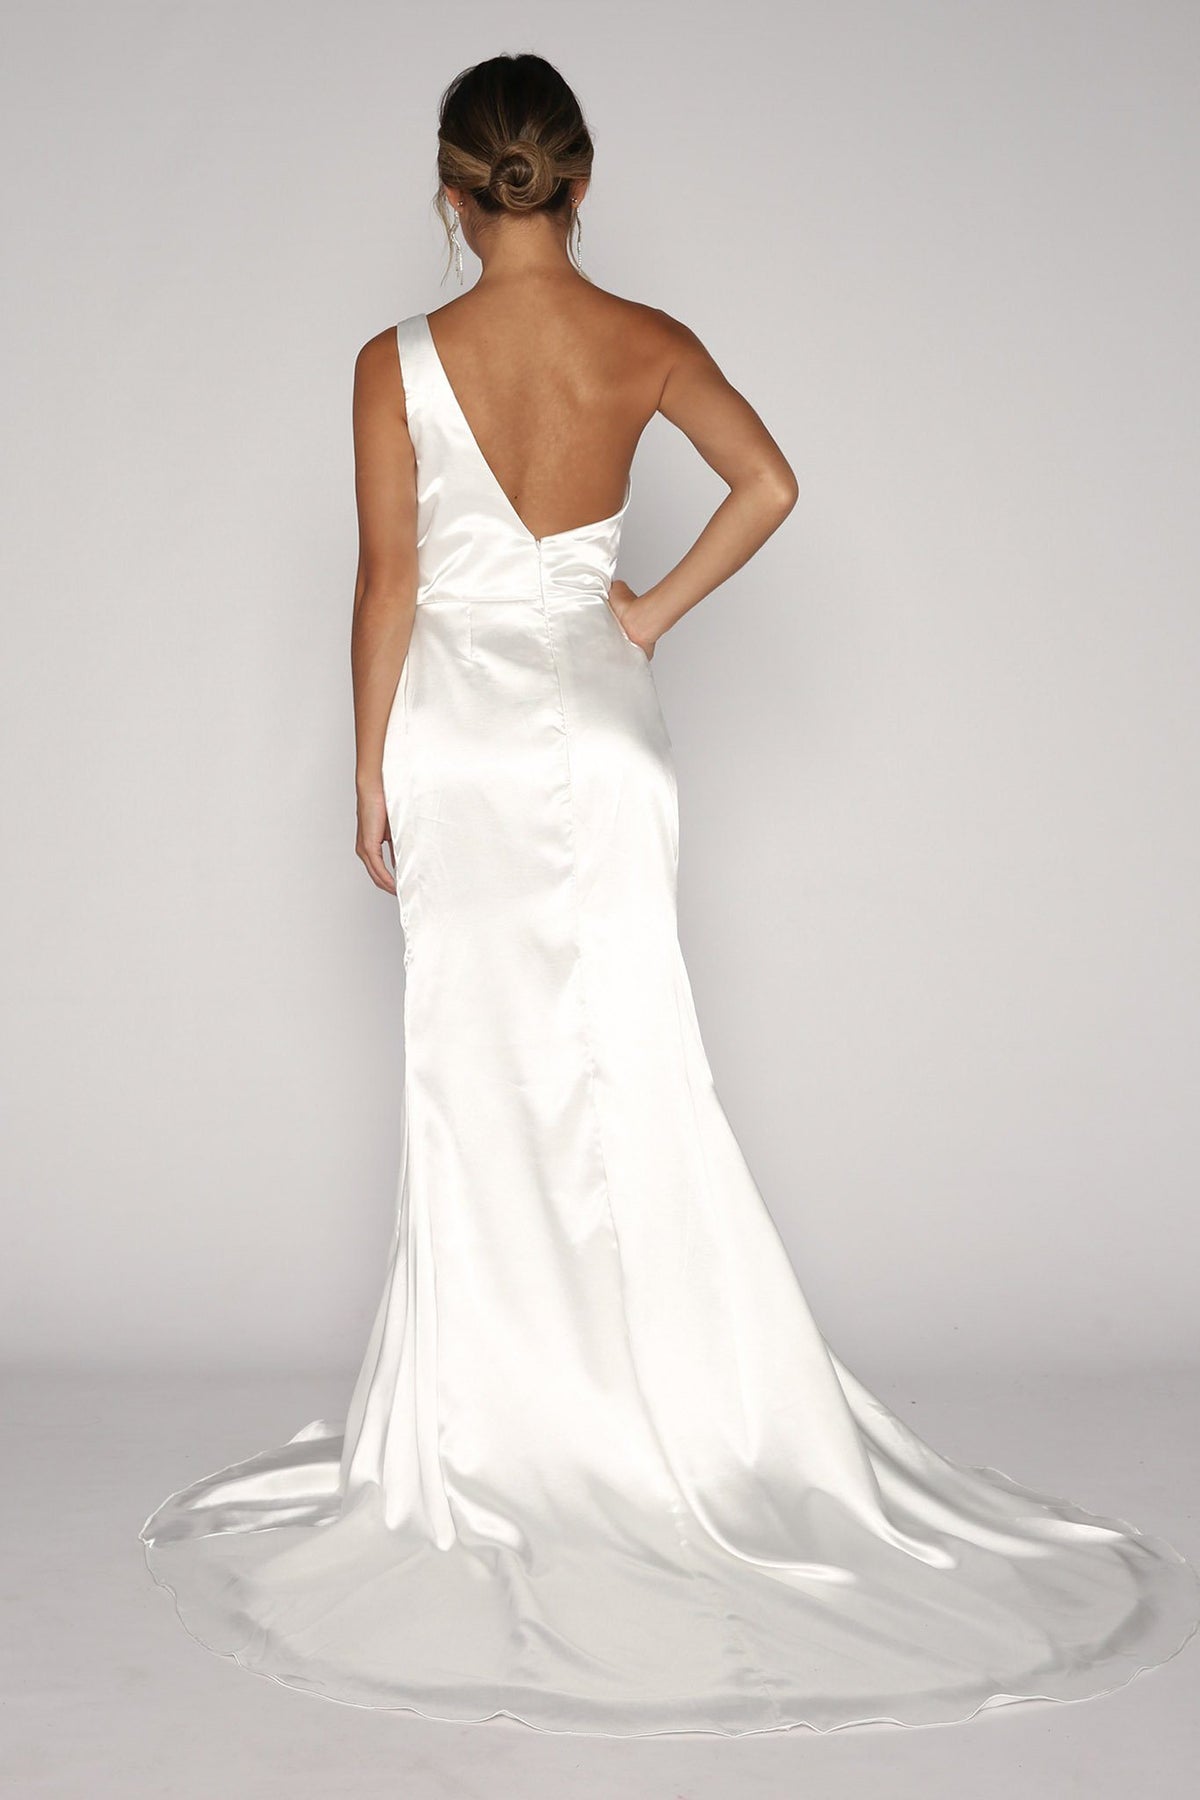 Ivory White Satin Evening Gown featuring One Shoulder Design, Gathering Ruched Waist Detail, Thigh High Slit and Sweep Train